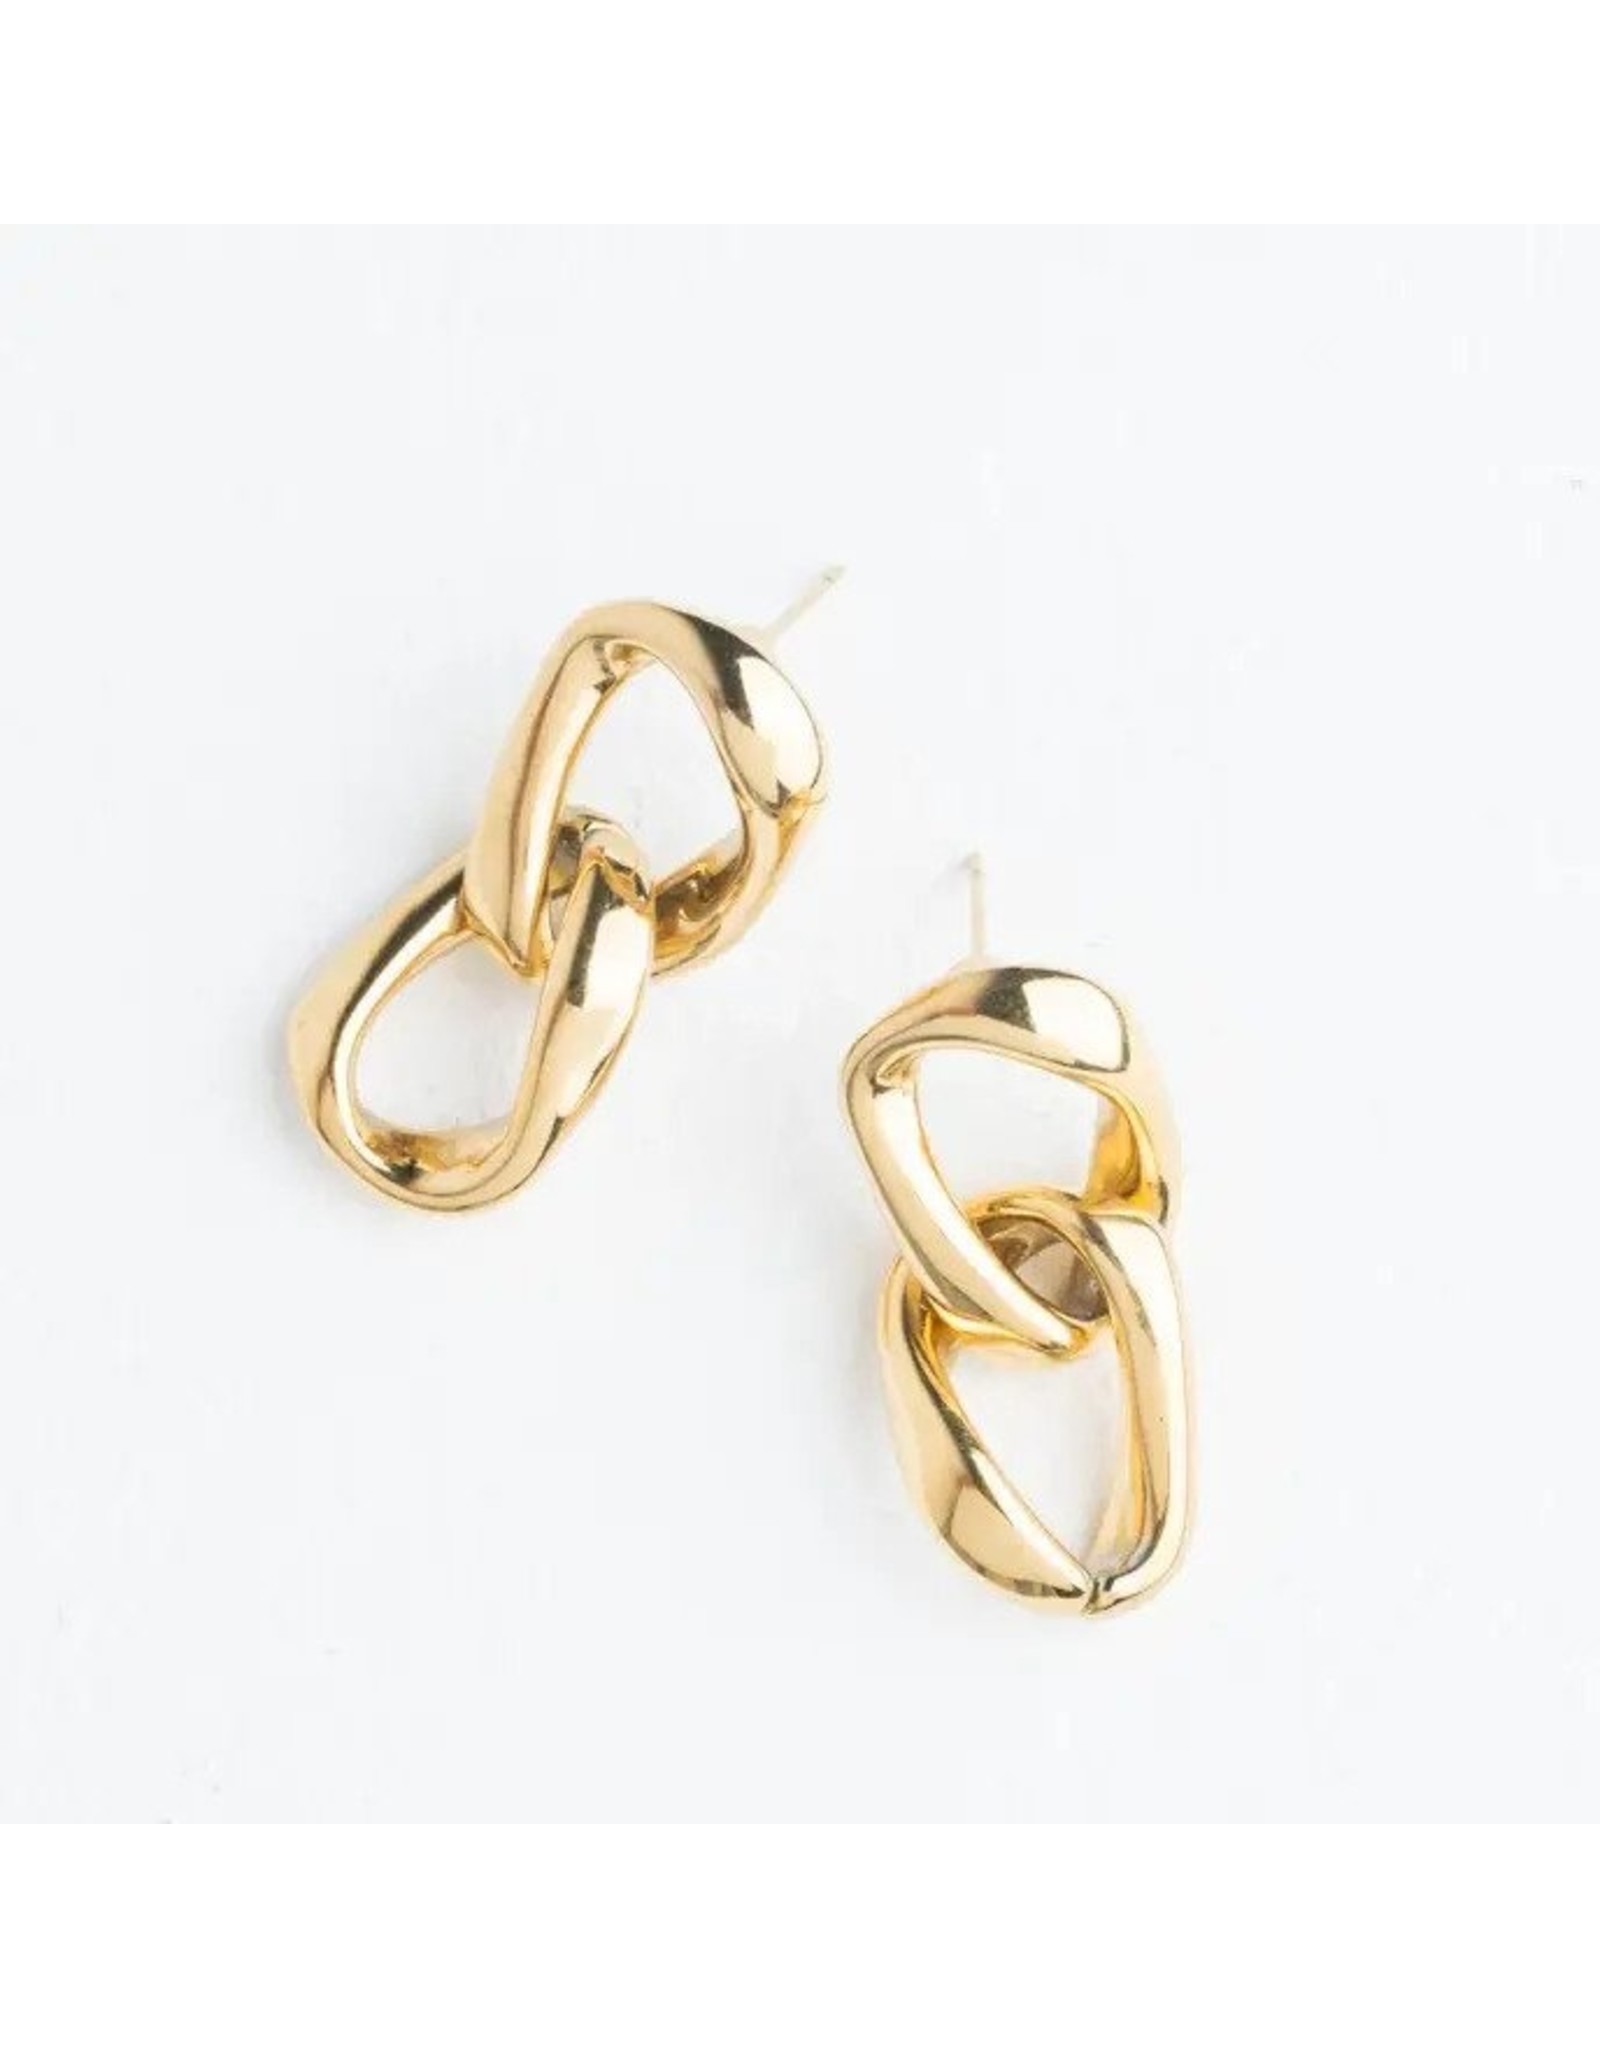 Trade roots Linked Together Earrings in Gold